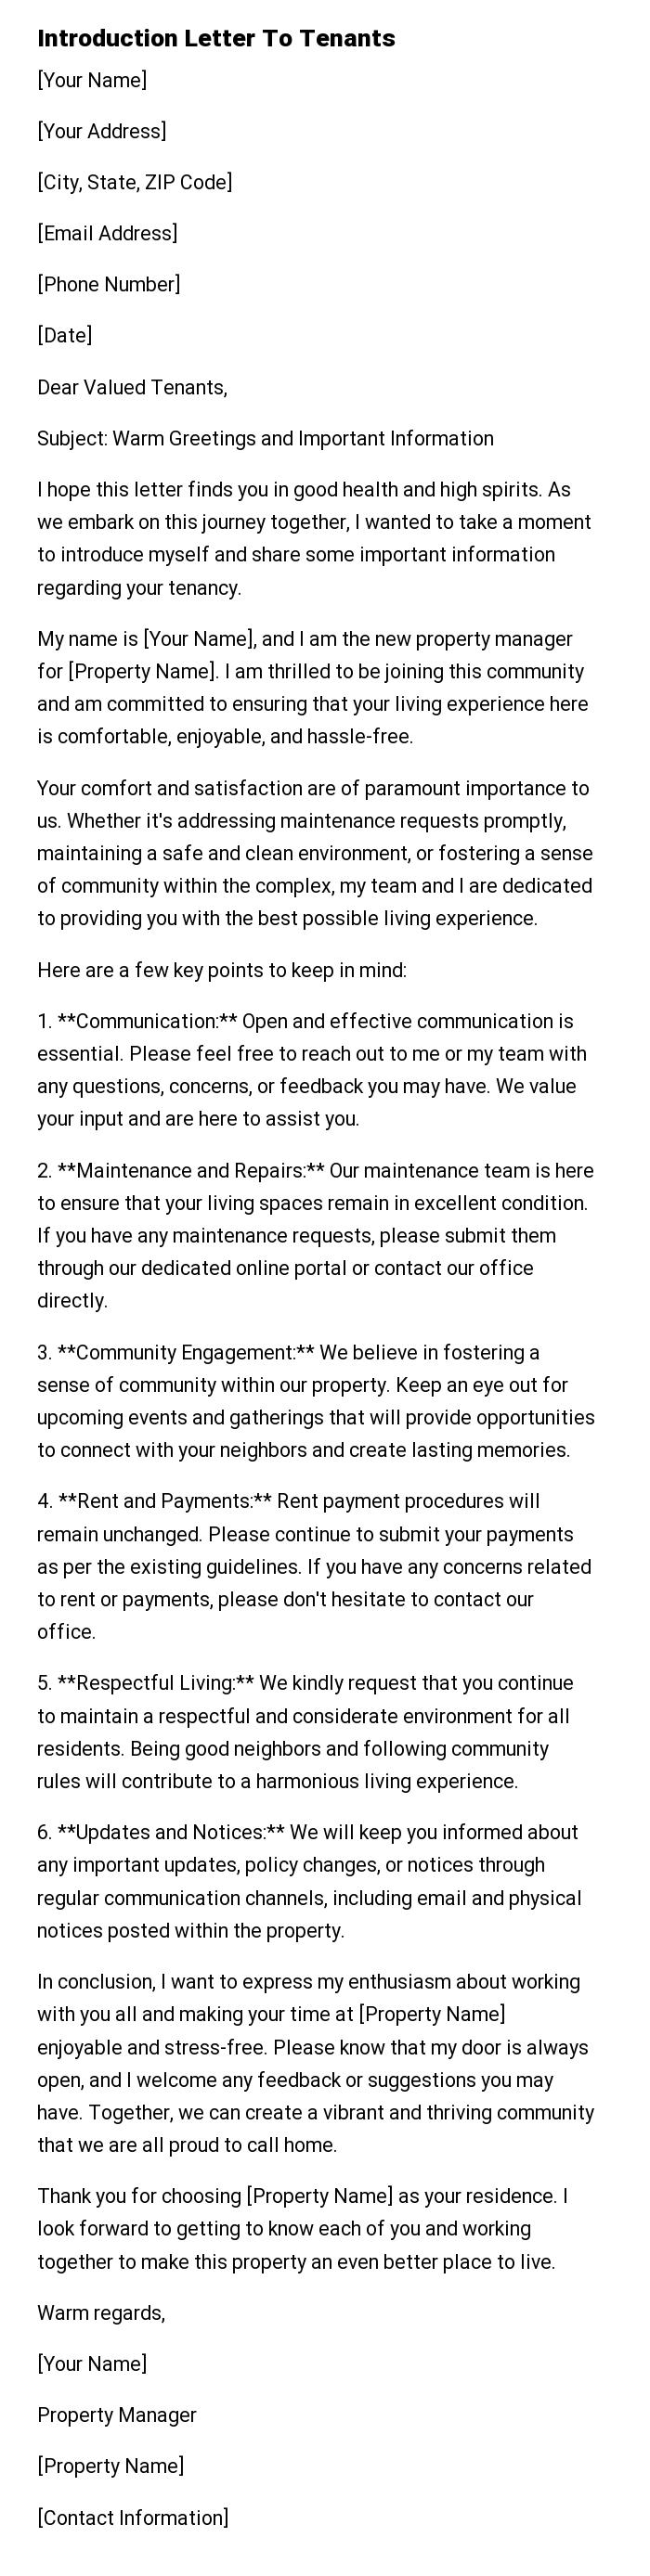 Introduction Letter To Tenants